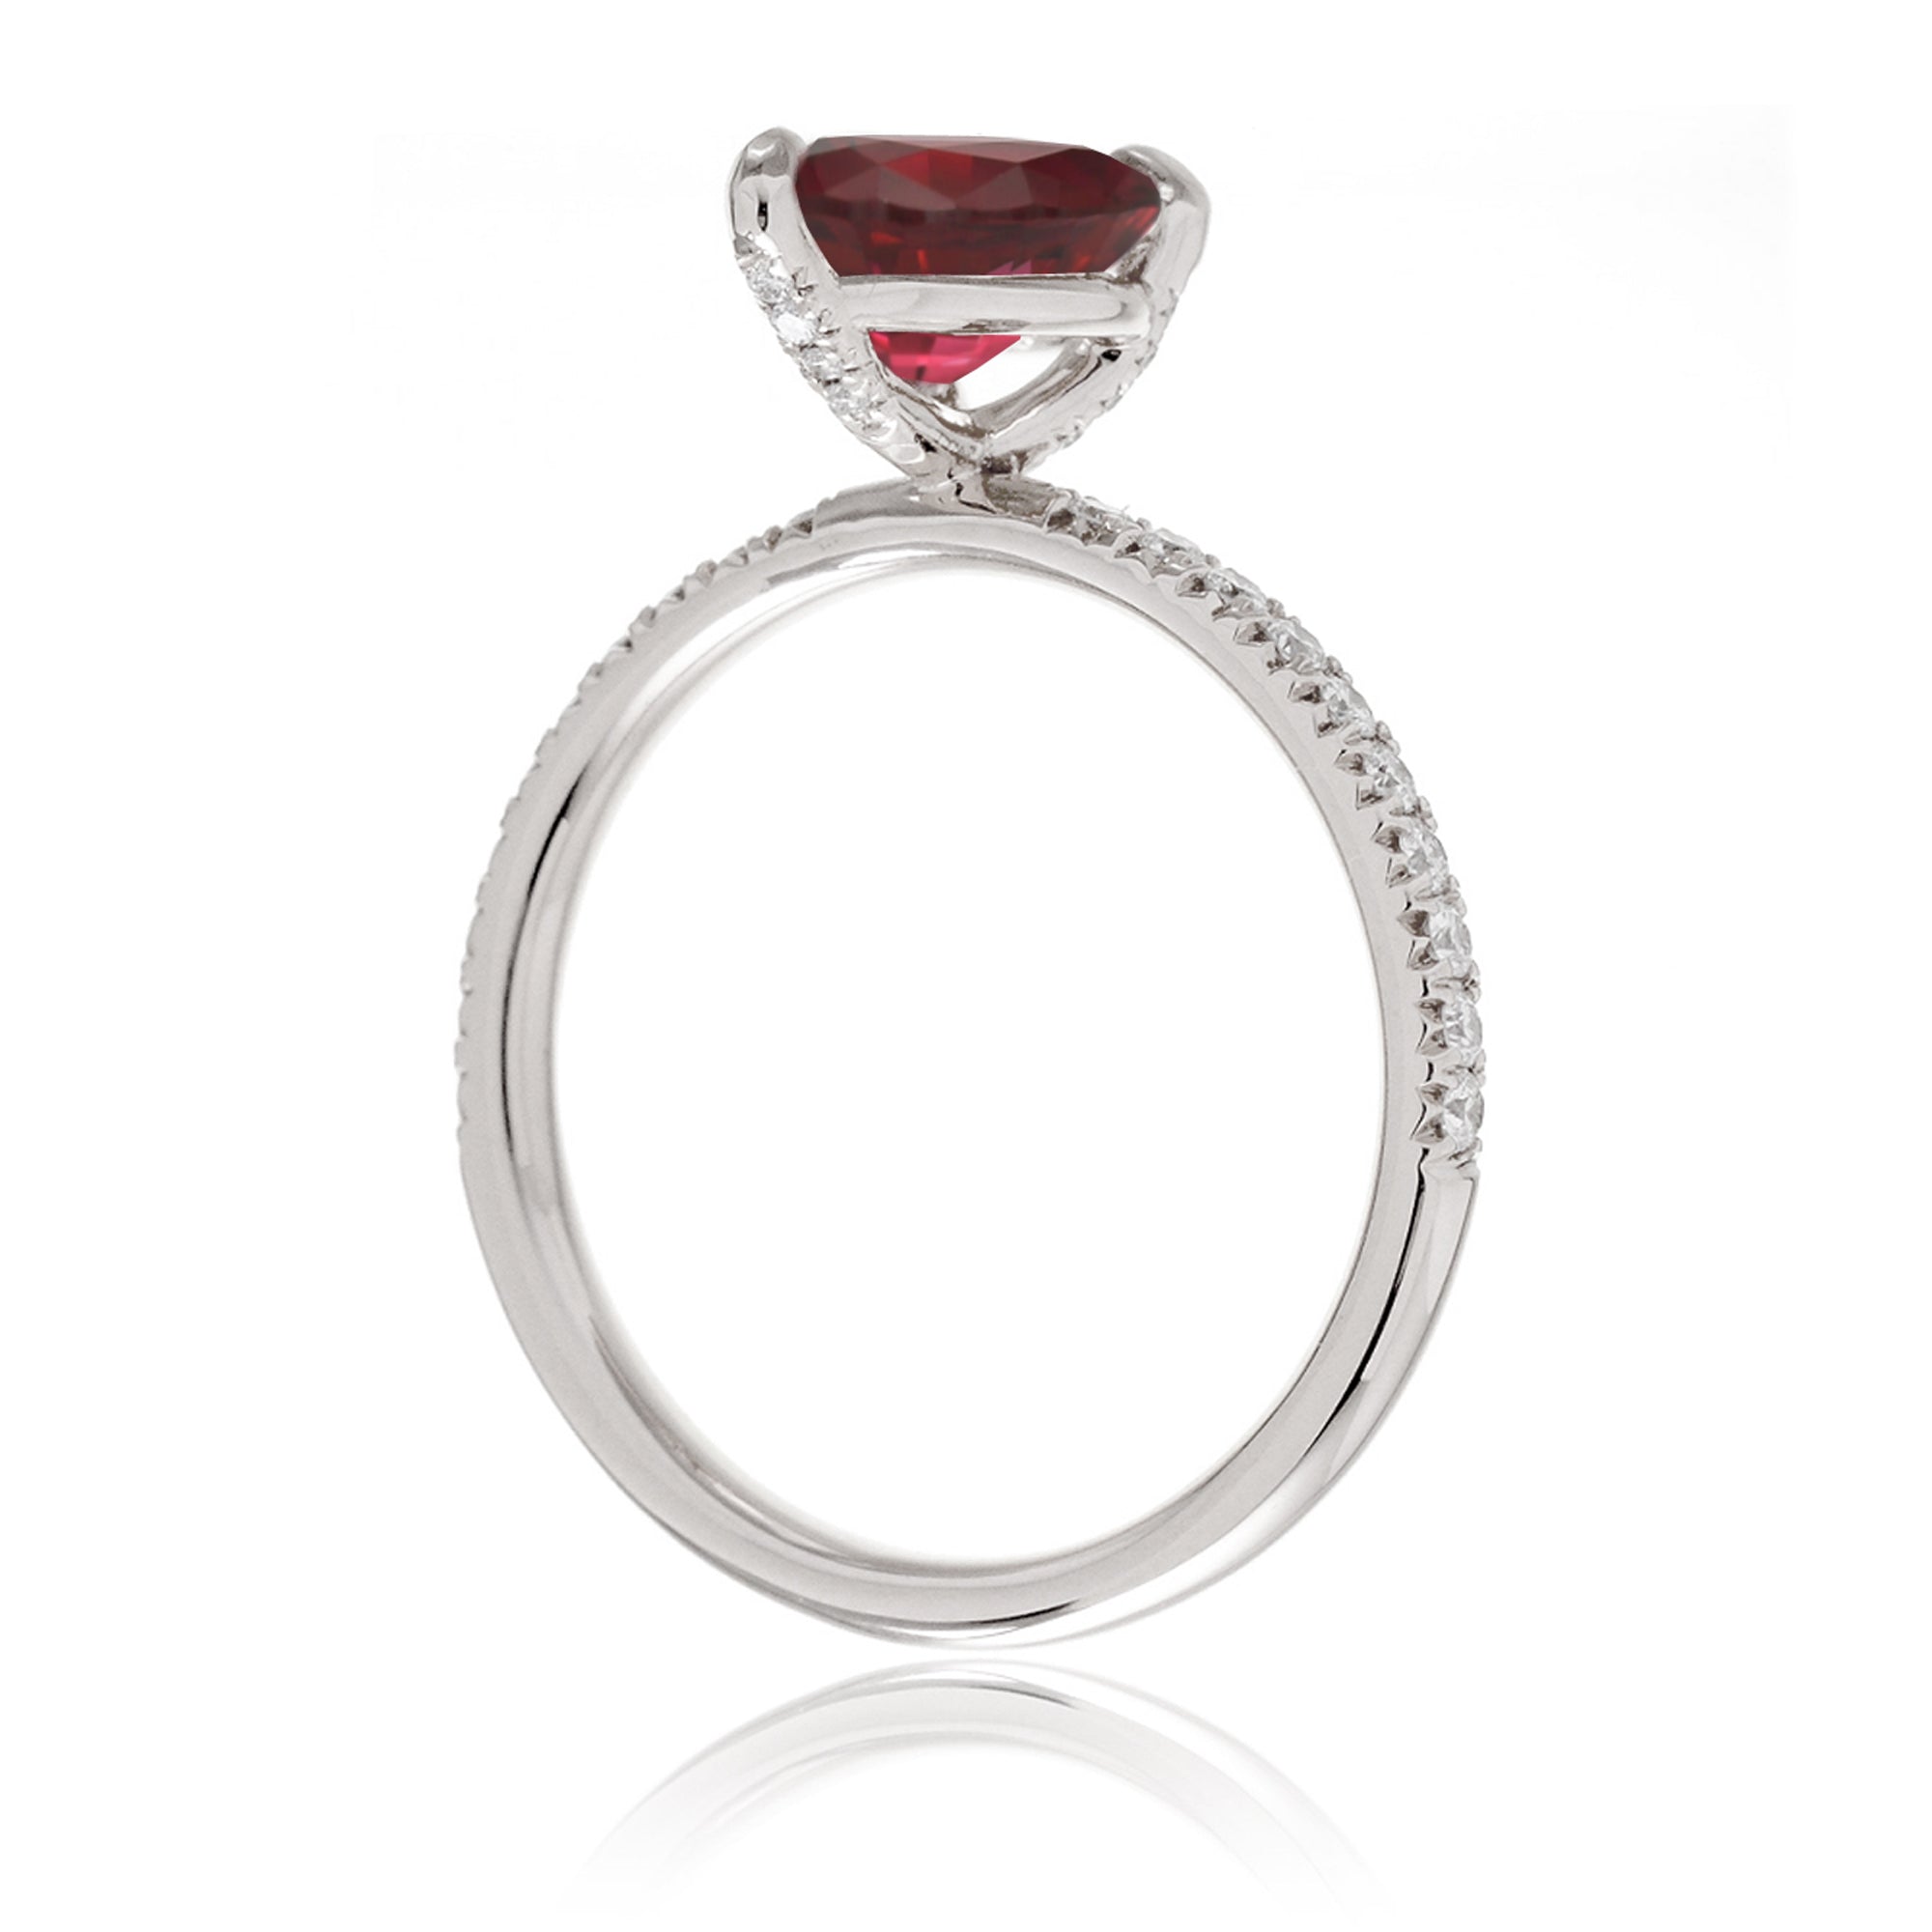 Pear cut lab-grown ruby engagement ring diamond band white gold - the Ava